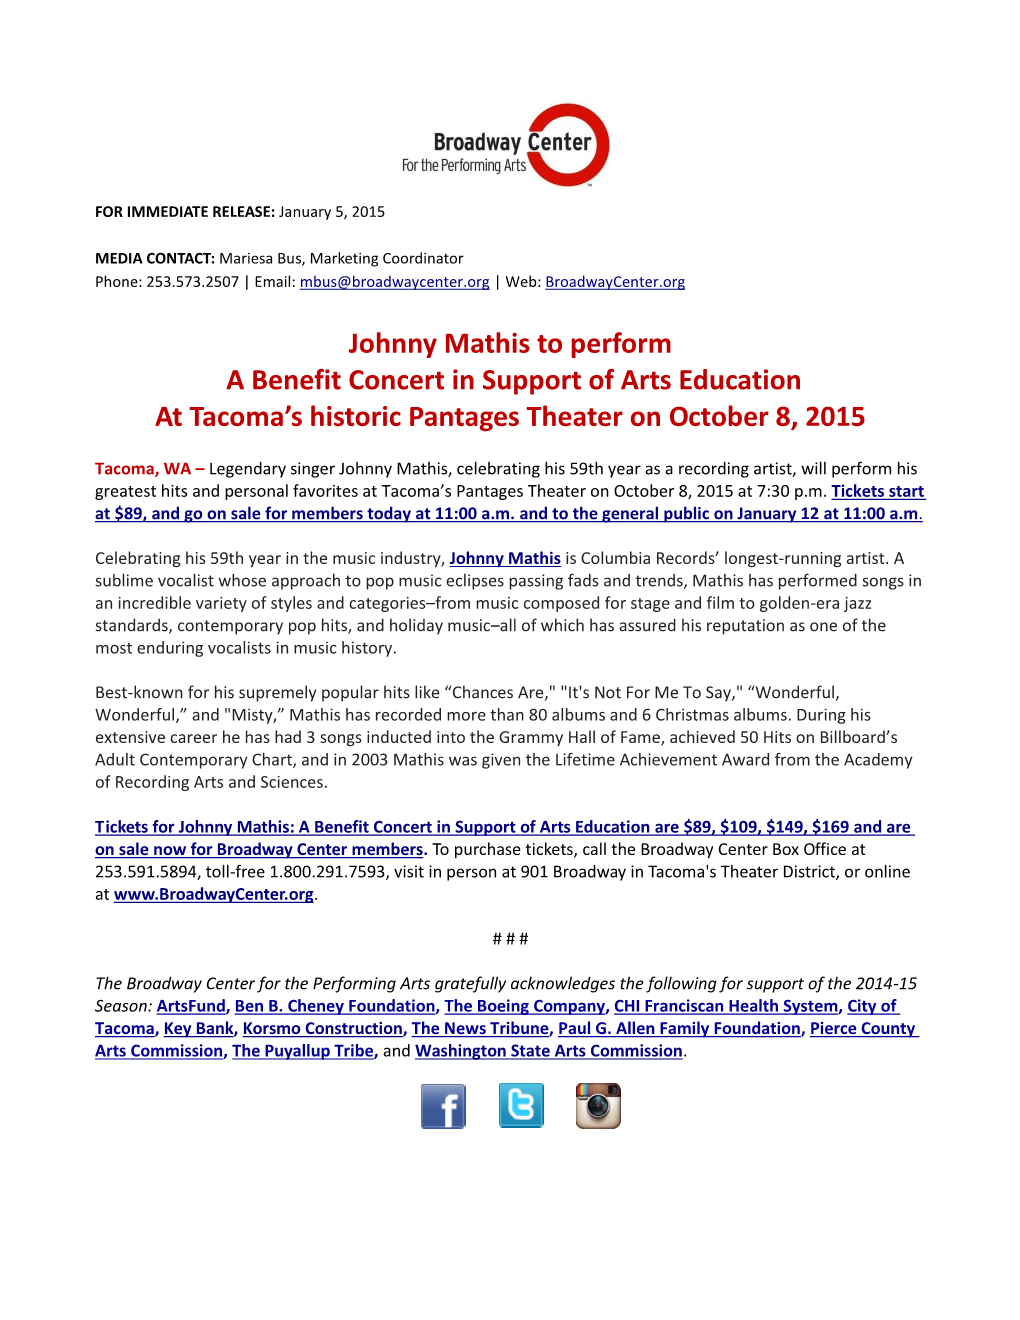 Johnny Mathis to Perform a Benefit Concert in Support of Arts Education at Tacoma’S Historic Pantages Theater on October 8, 2015